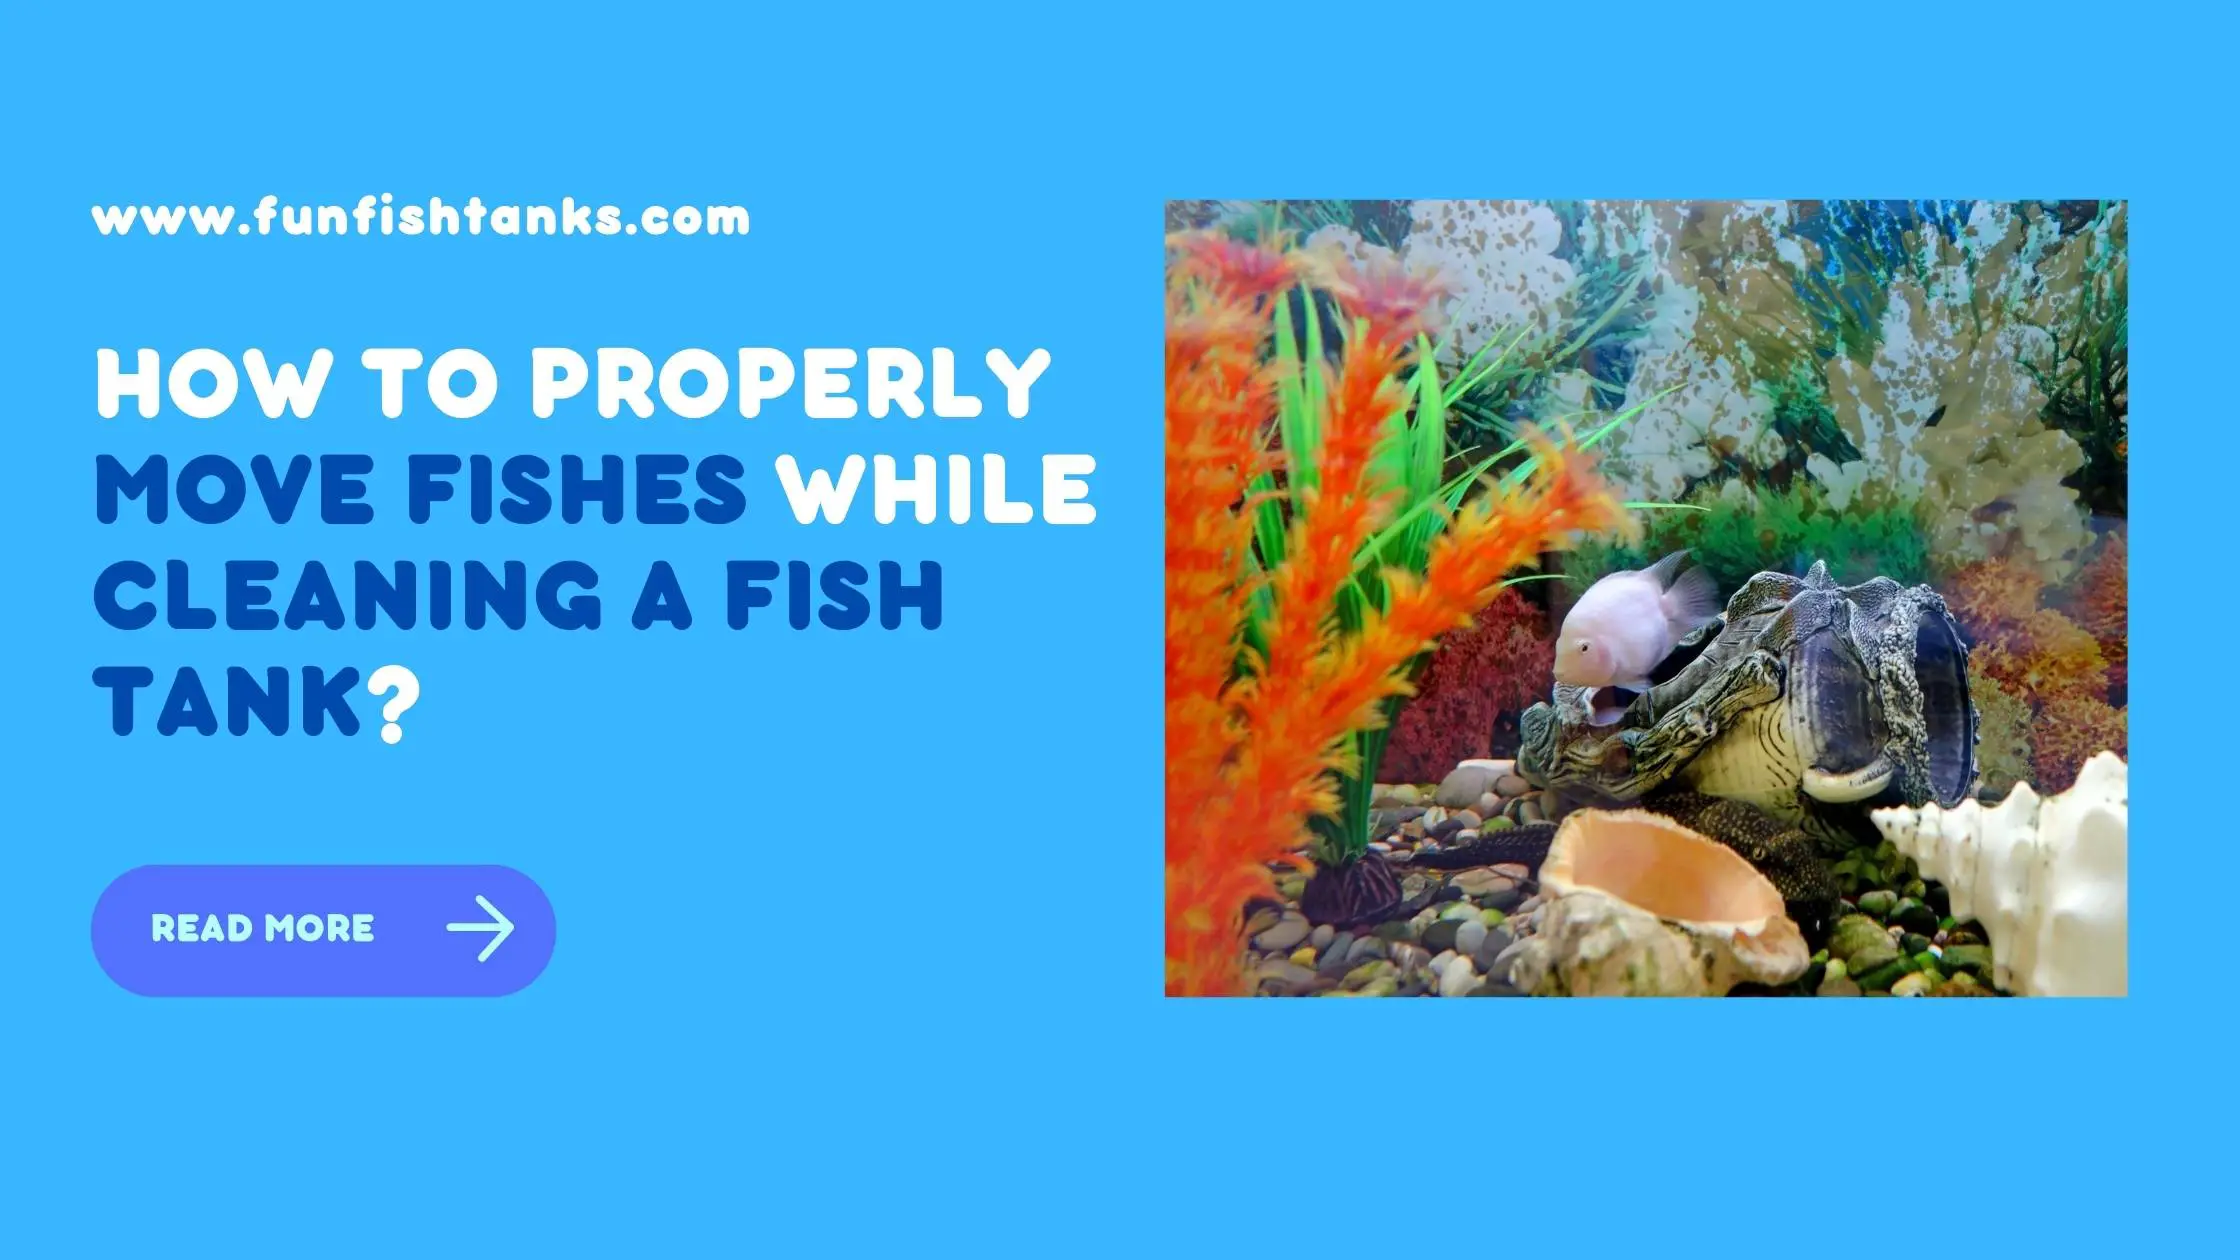 How to properly Move Fishes While Cleaning a Fish Tank